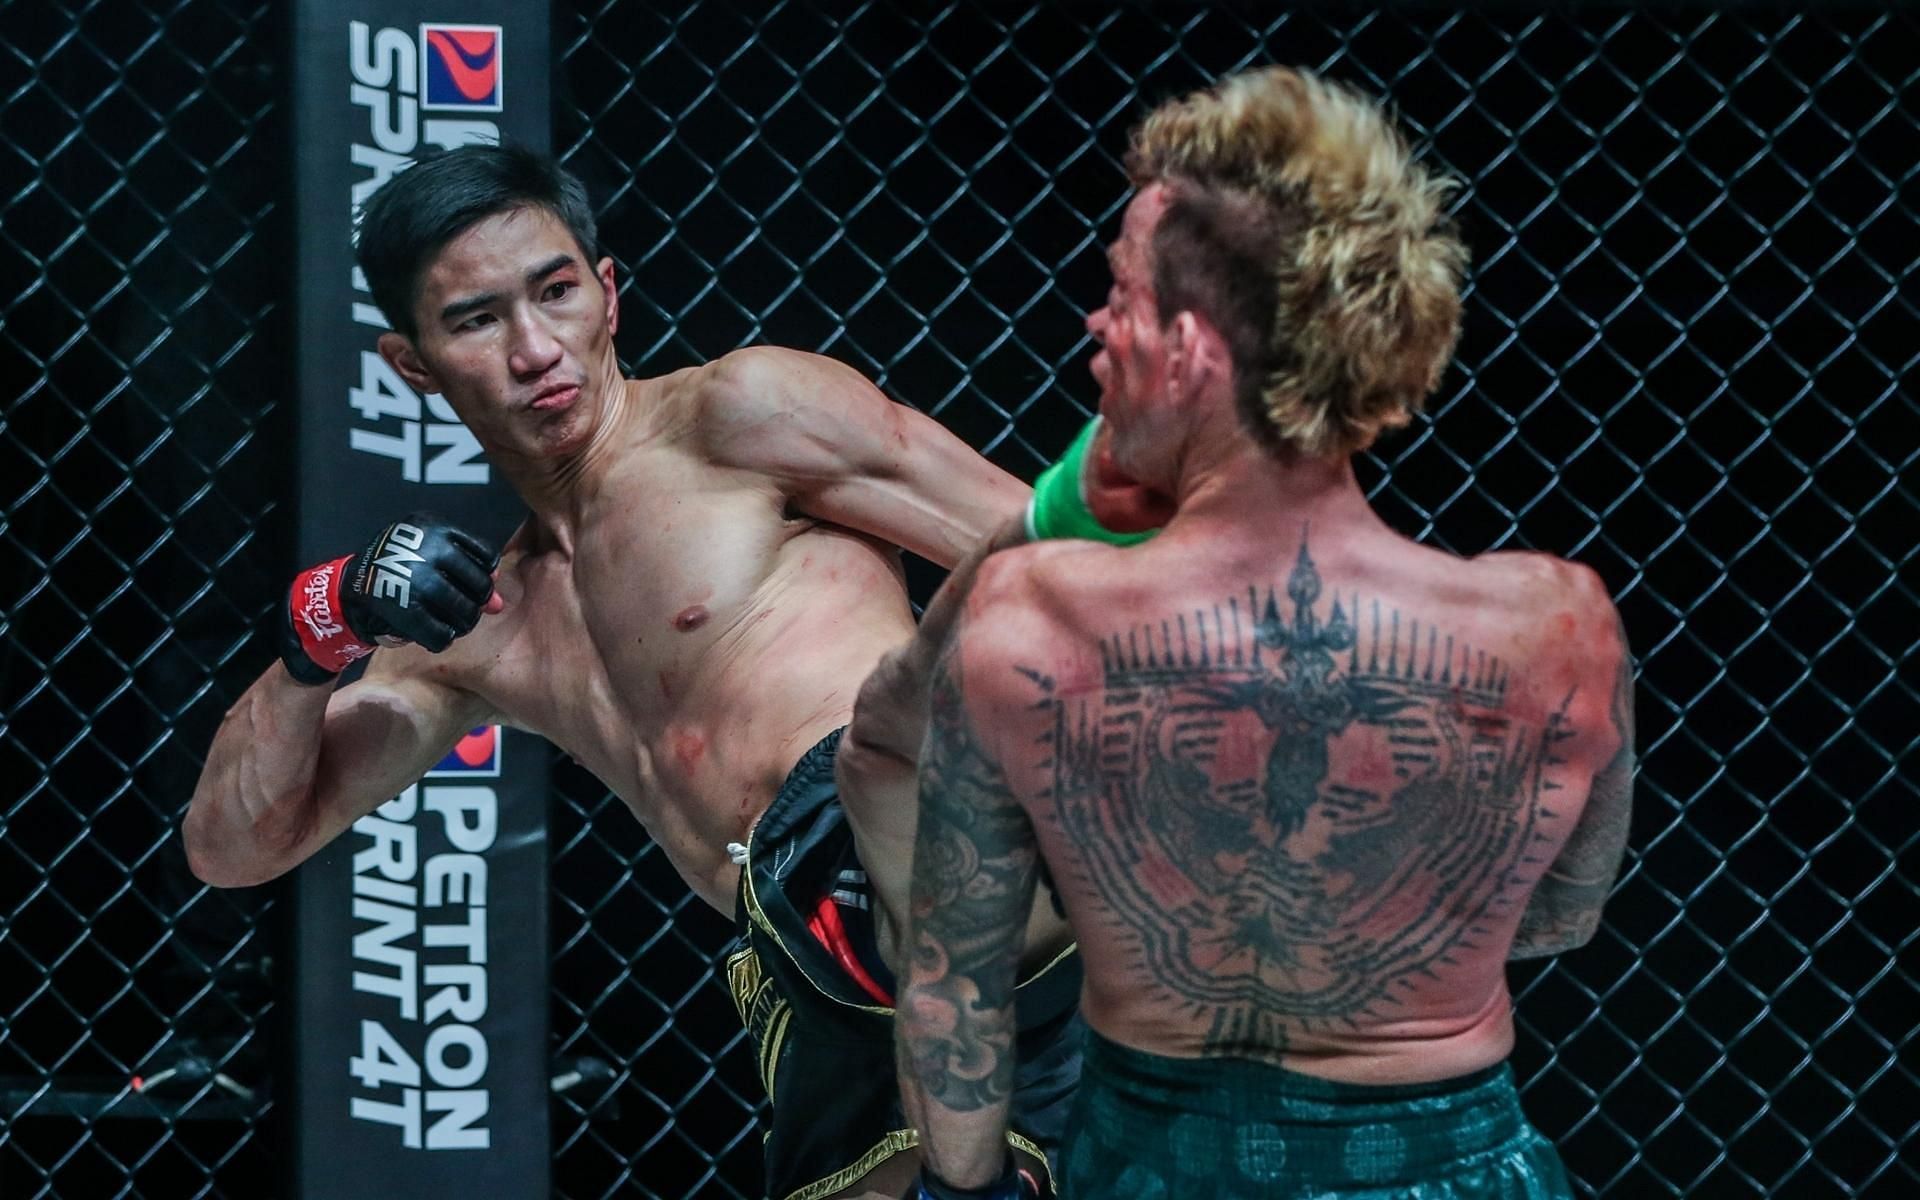 Tawanchai (left) might bring back his epic head-kick in ONE: Heavy Hitters against the highly-touted Saemapetch. (Image courtesy of ONE Championship)